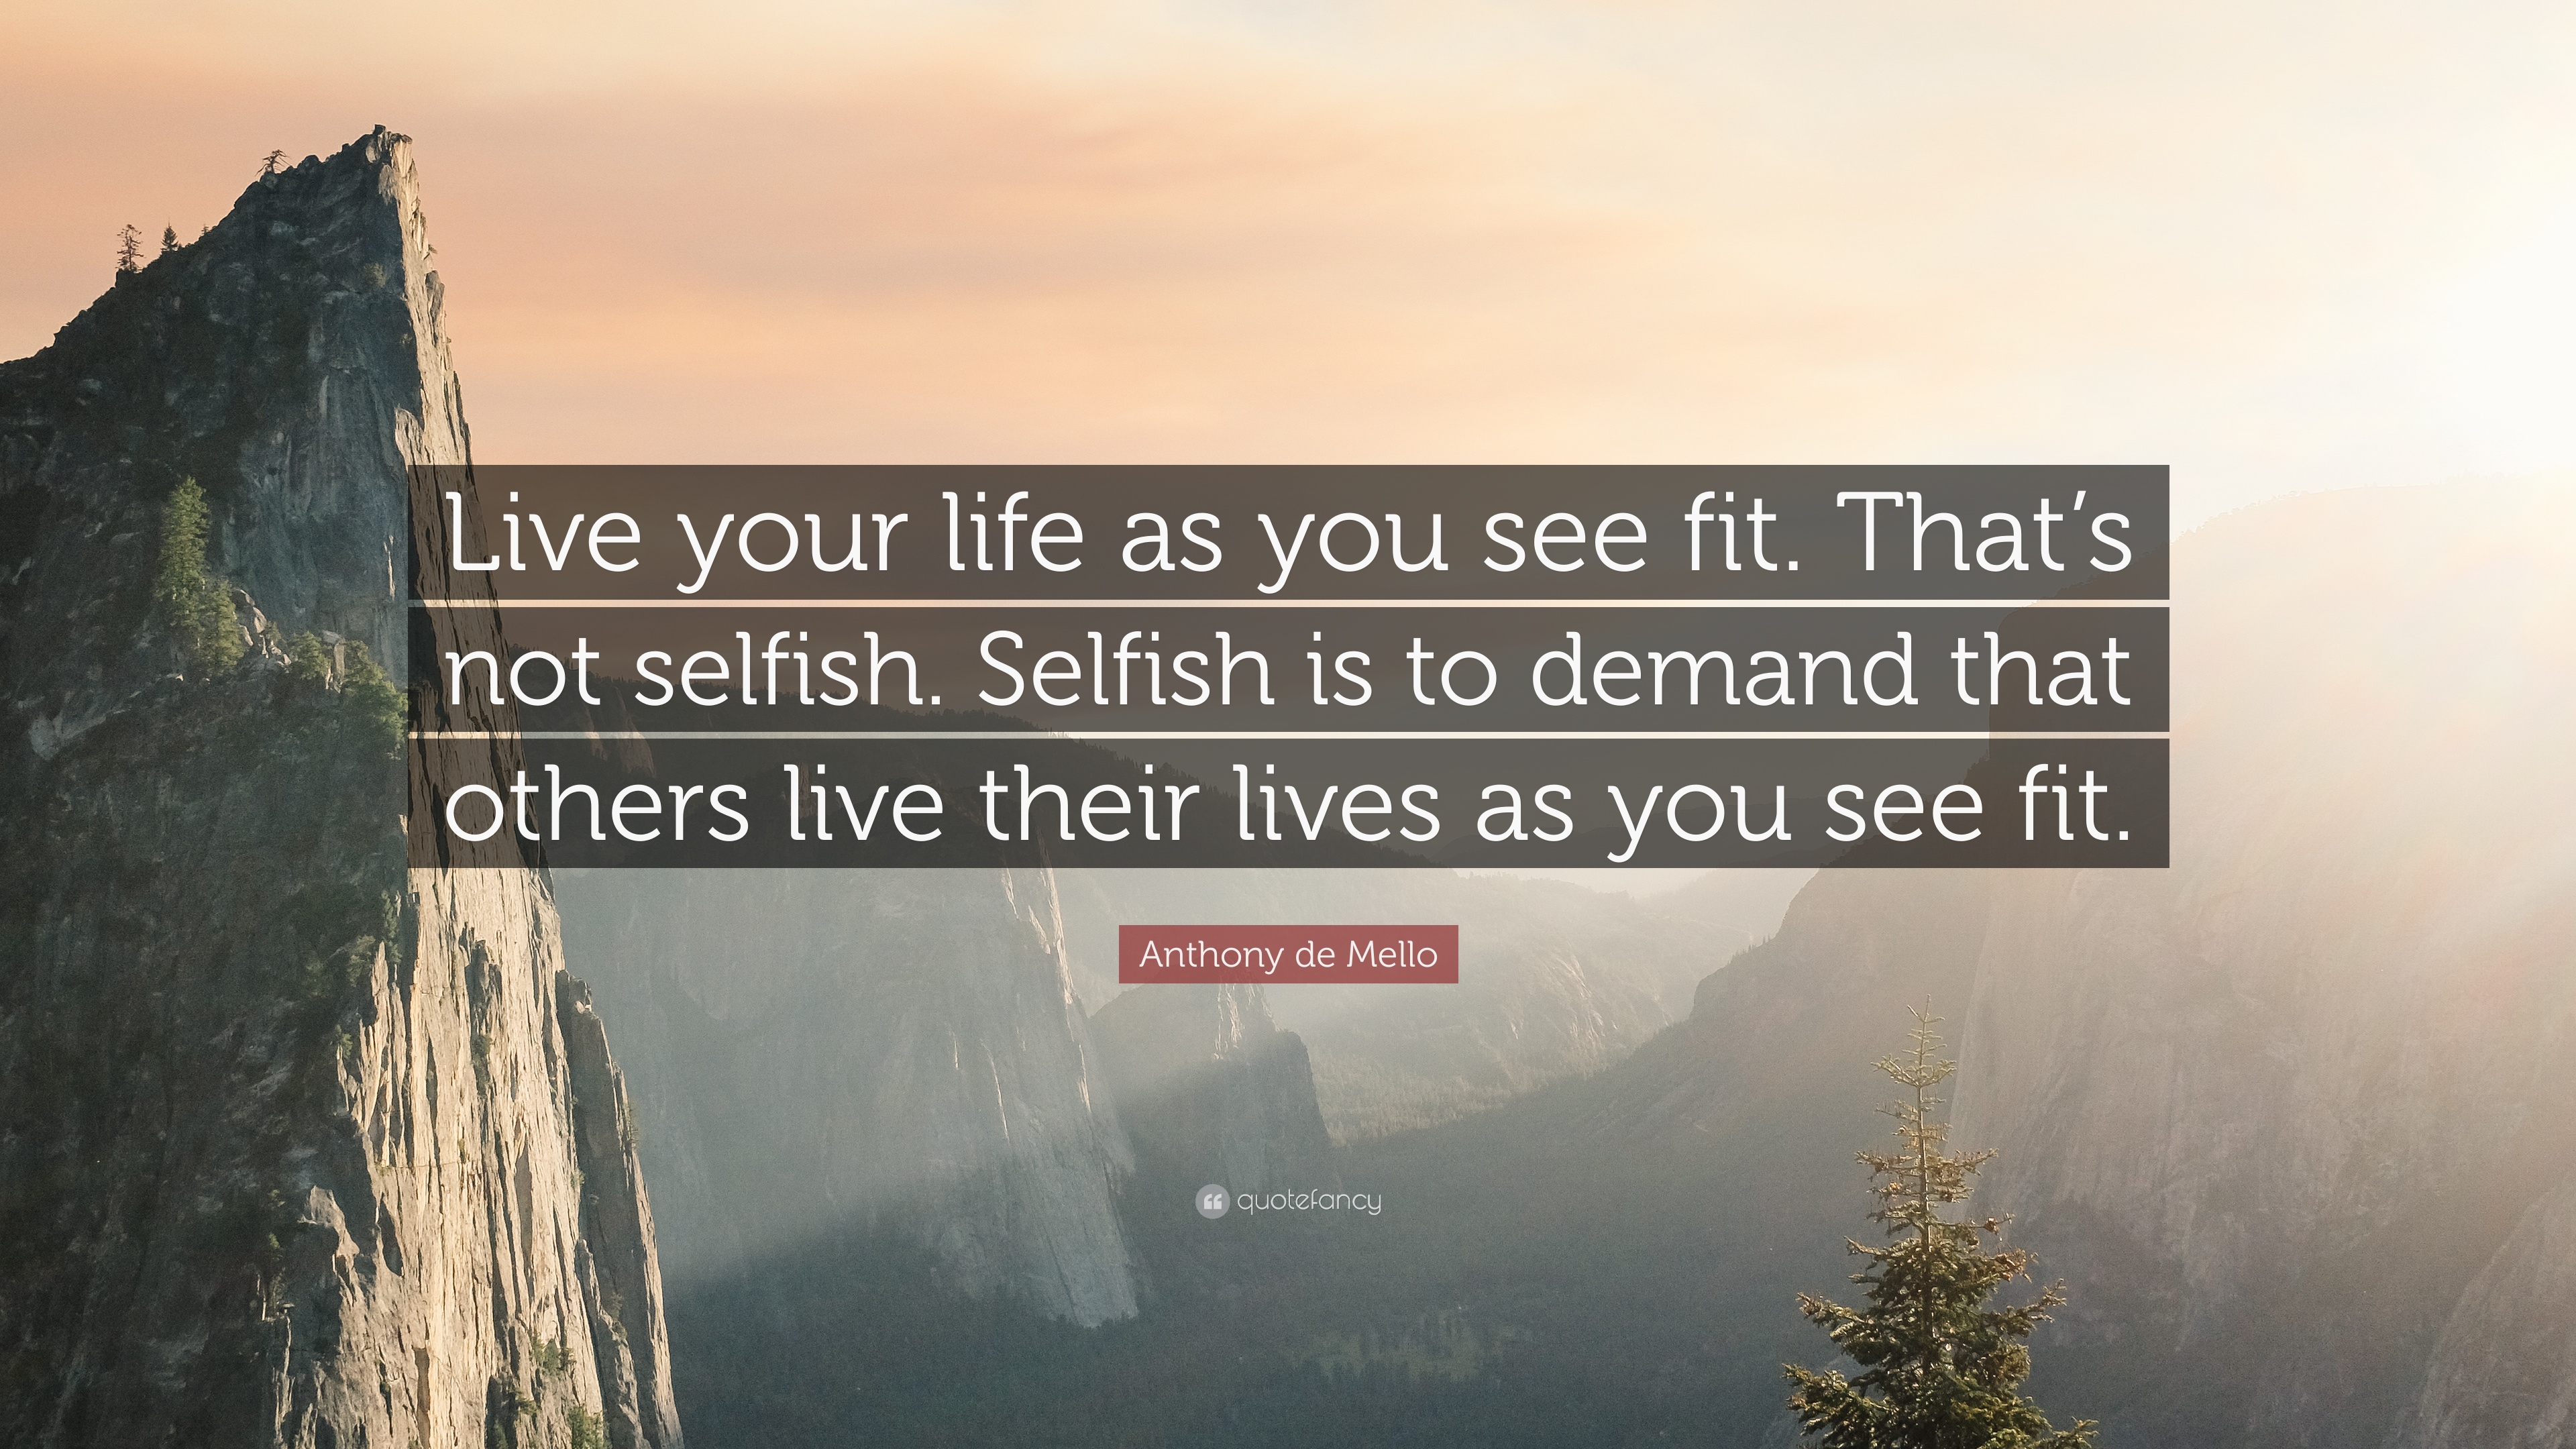 lord's prayer quotes - Live your life as you see fit. That's not selfish. Selfish is to demand that others live their lives as you see fit. Anthony de Mello Com